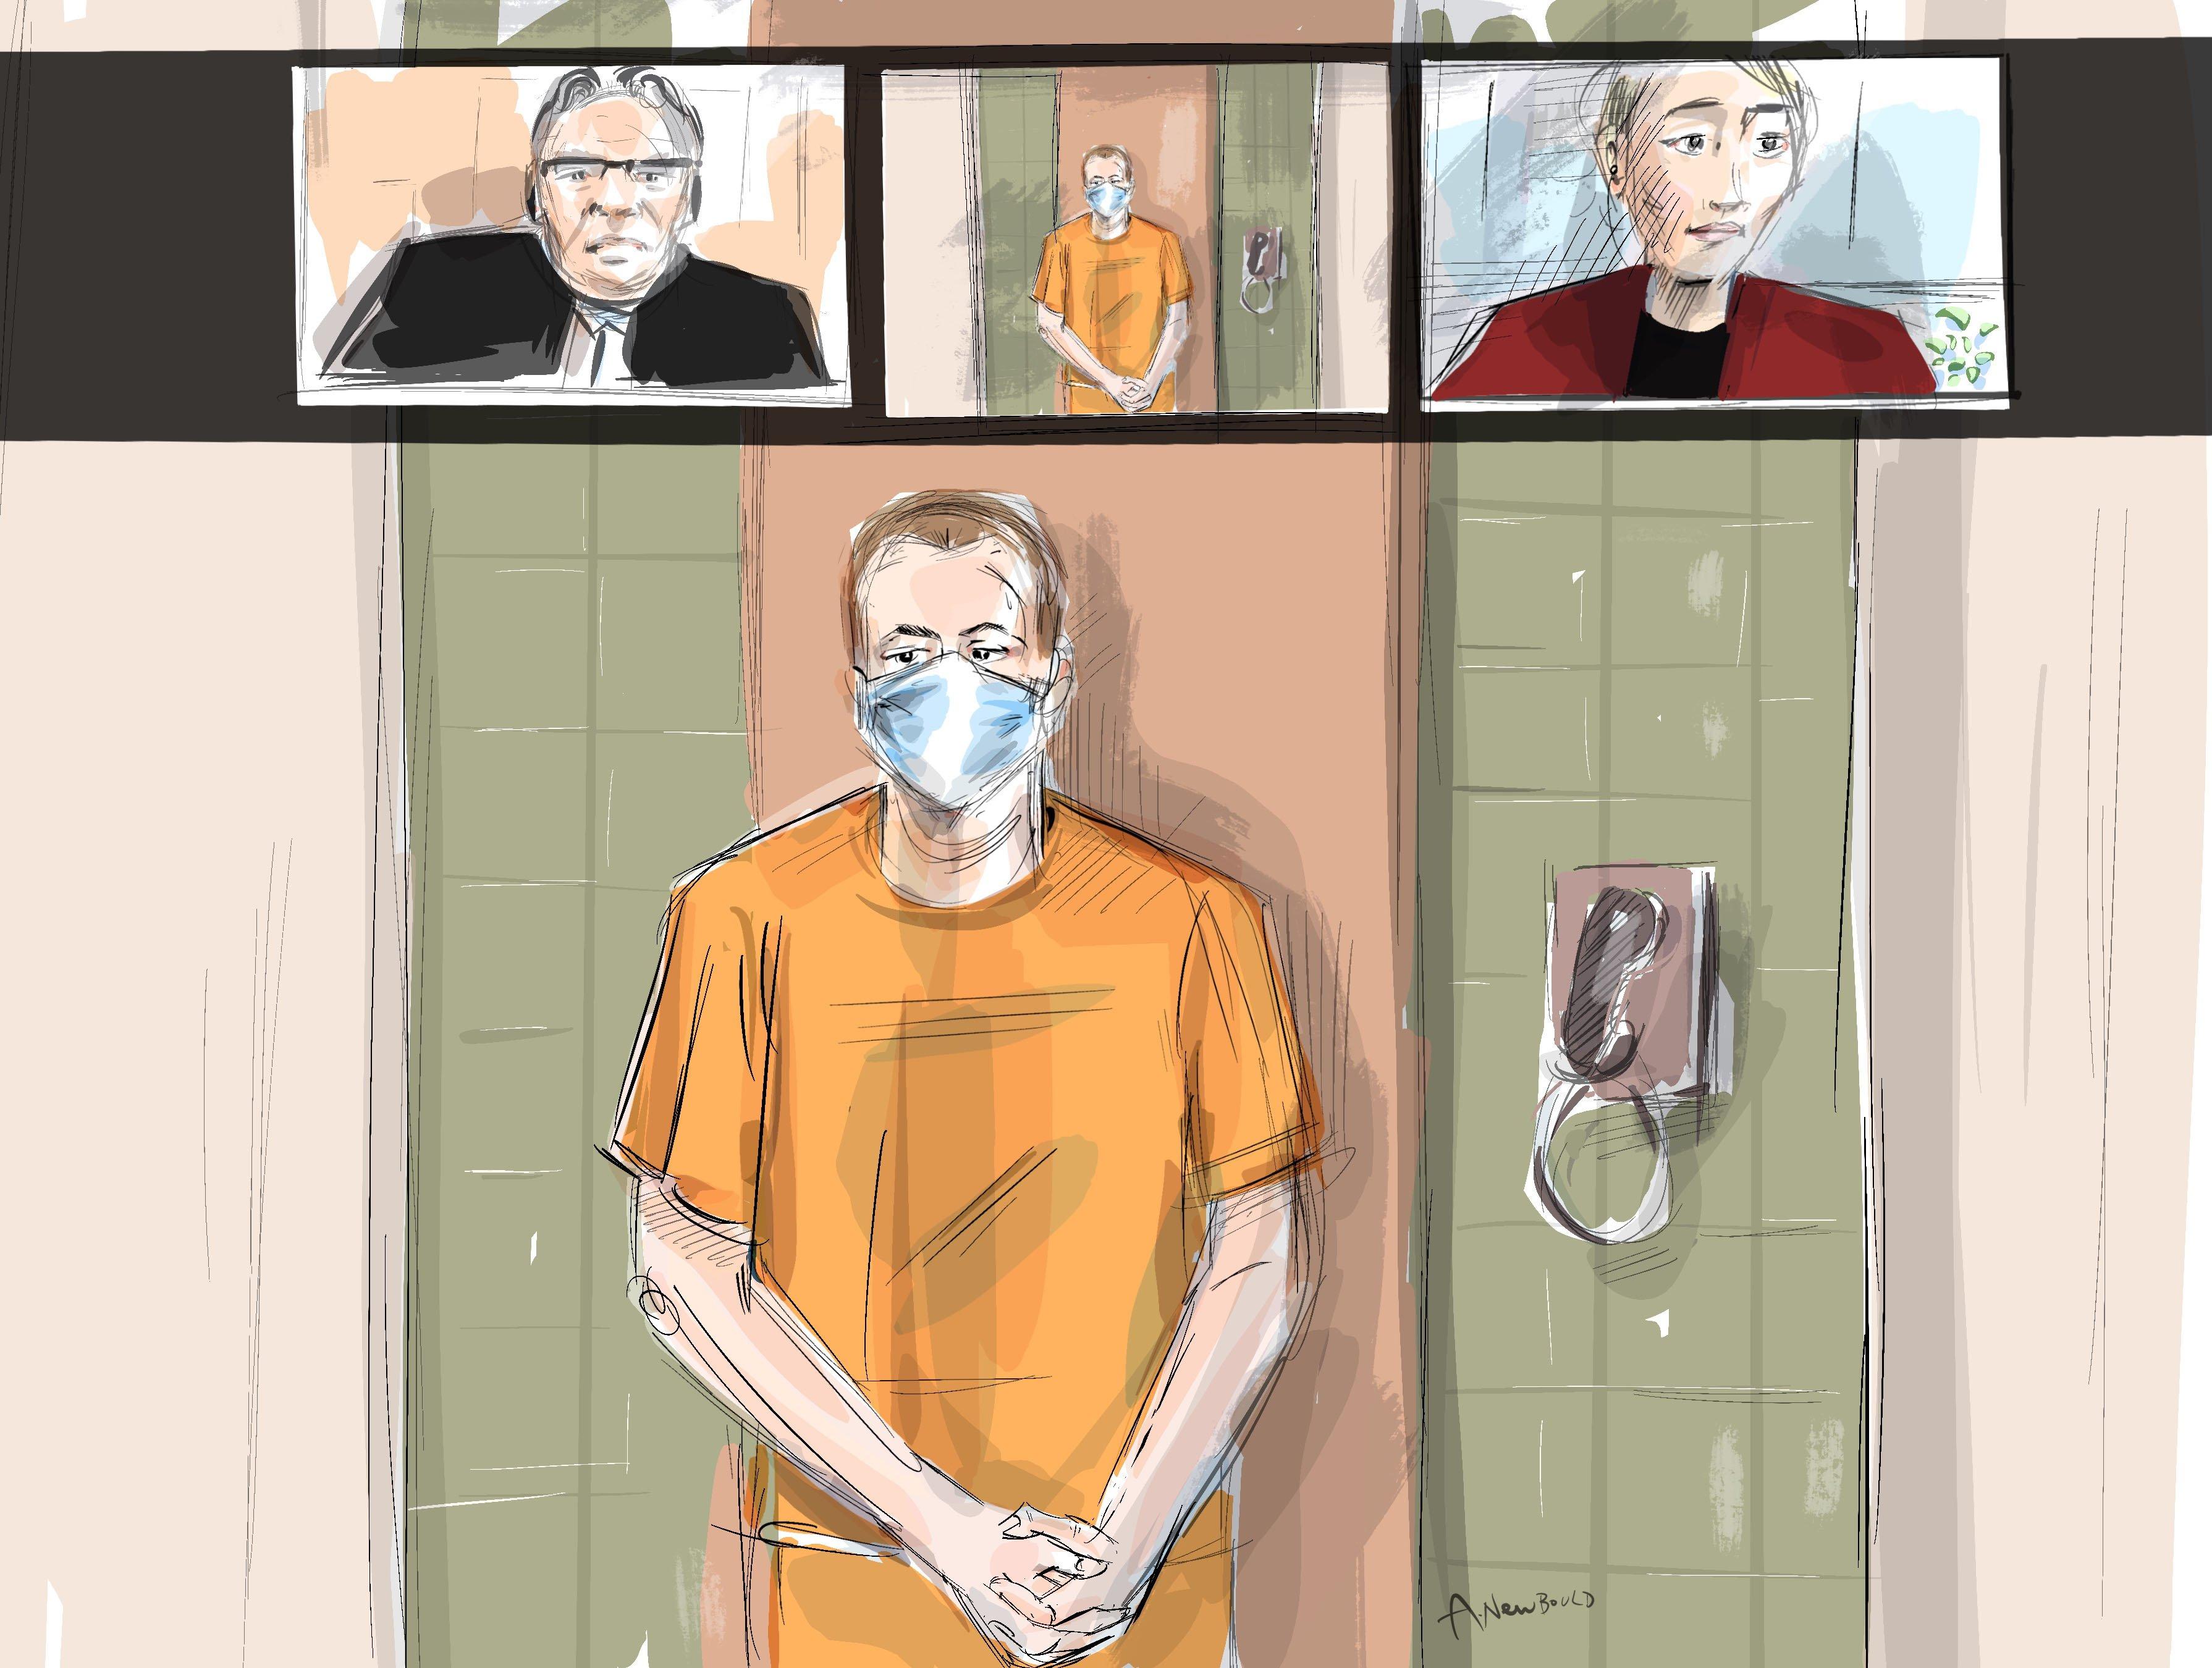 Veltman made a virtual court appearance in October of 2021, as Justice of the Peace Robert Seneshen (top left) and lawyer Alayna Jay look on. (Sketch courtesy of Alexandra Newbould/The Canadian Press)